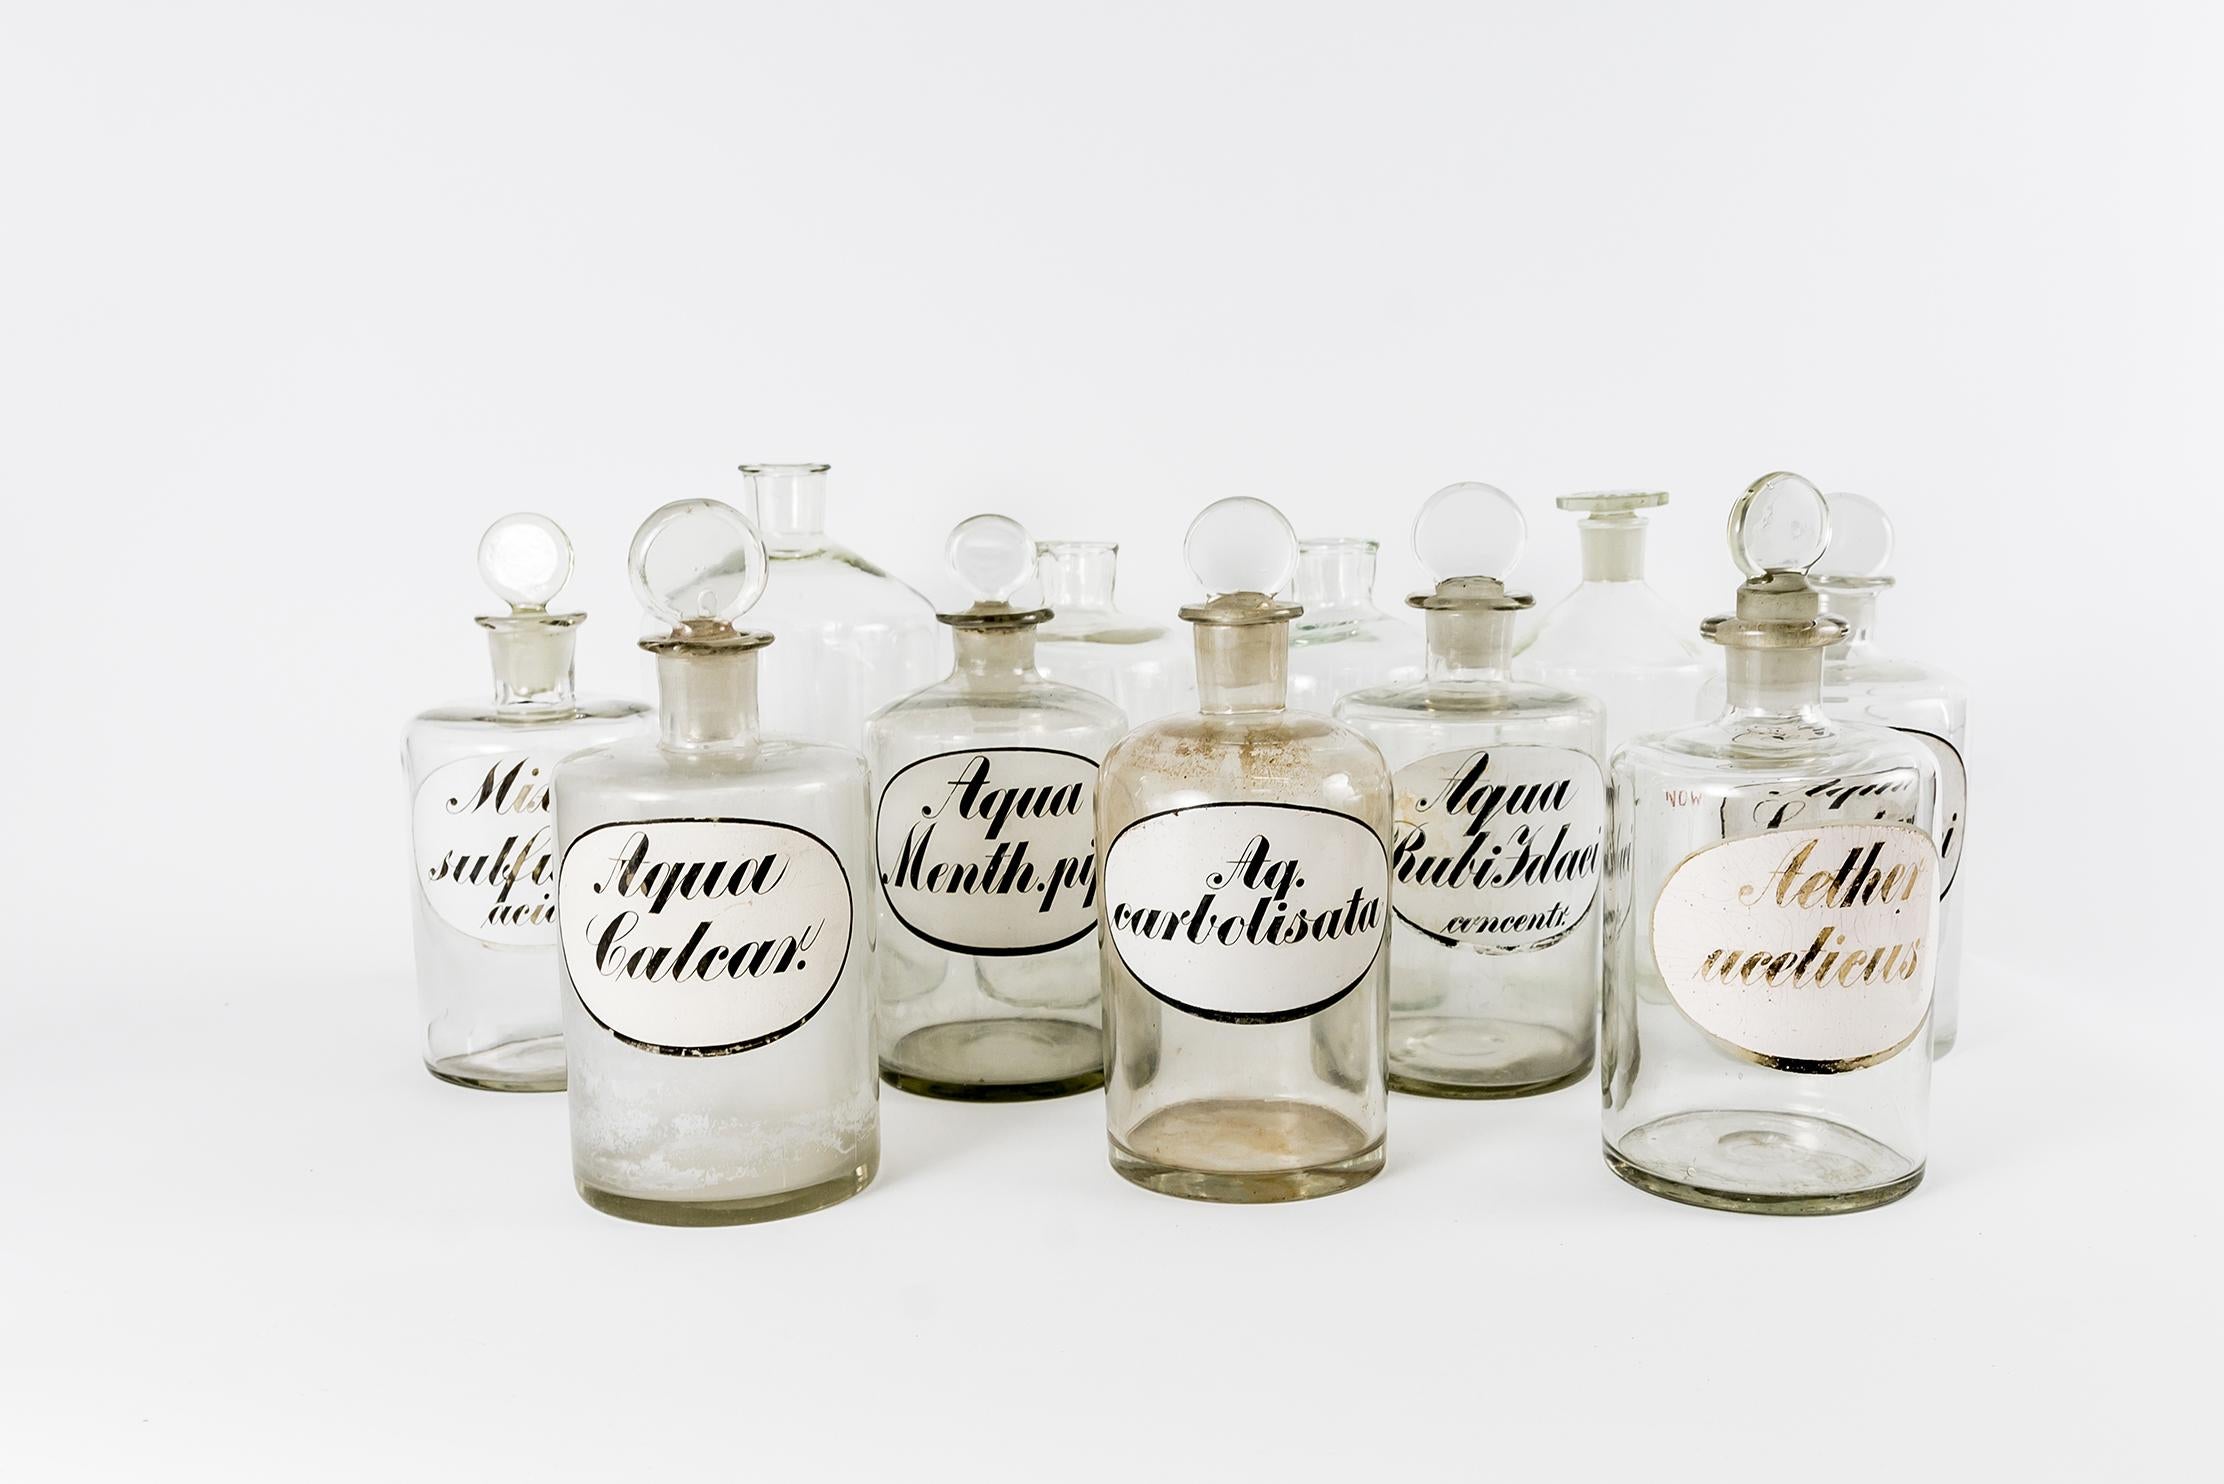 Set Of 11 Glass Pharmacy Bottles
The set:
21cm x 7pcs
All 7 Bottles have round glass stoppers, and inscriptions. one of the bottles is slightly cracked, 1920s, Germany
23cm x 3pcs (one with glass stopper)
25cm x 1pcs
All 4 Bottles are from the